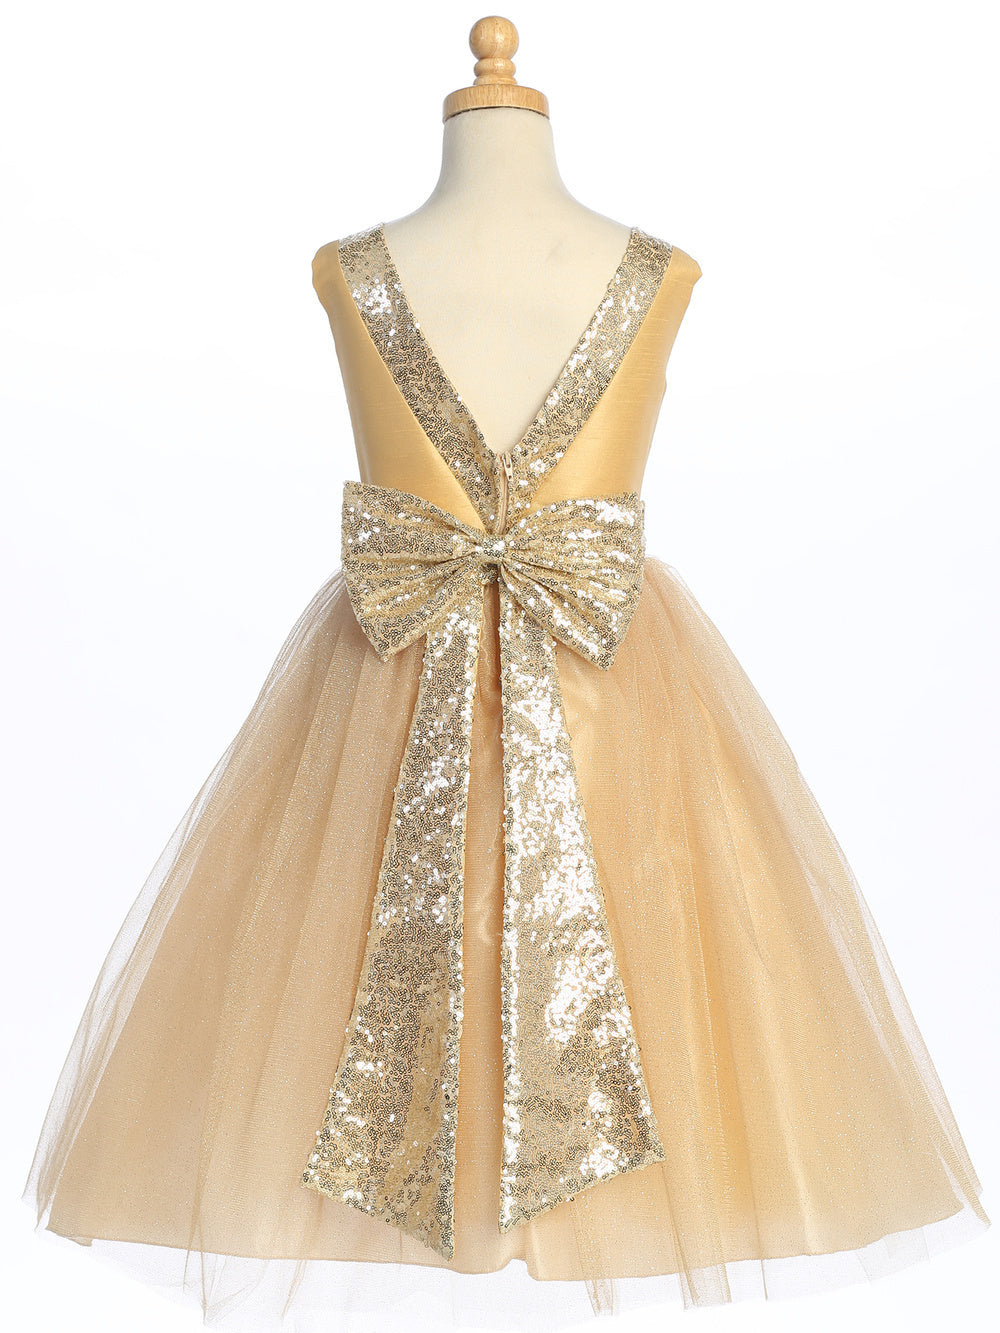 Gold shantung dress with sparkle tulle and sequins, a star-studded dream for a flower girl.